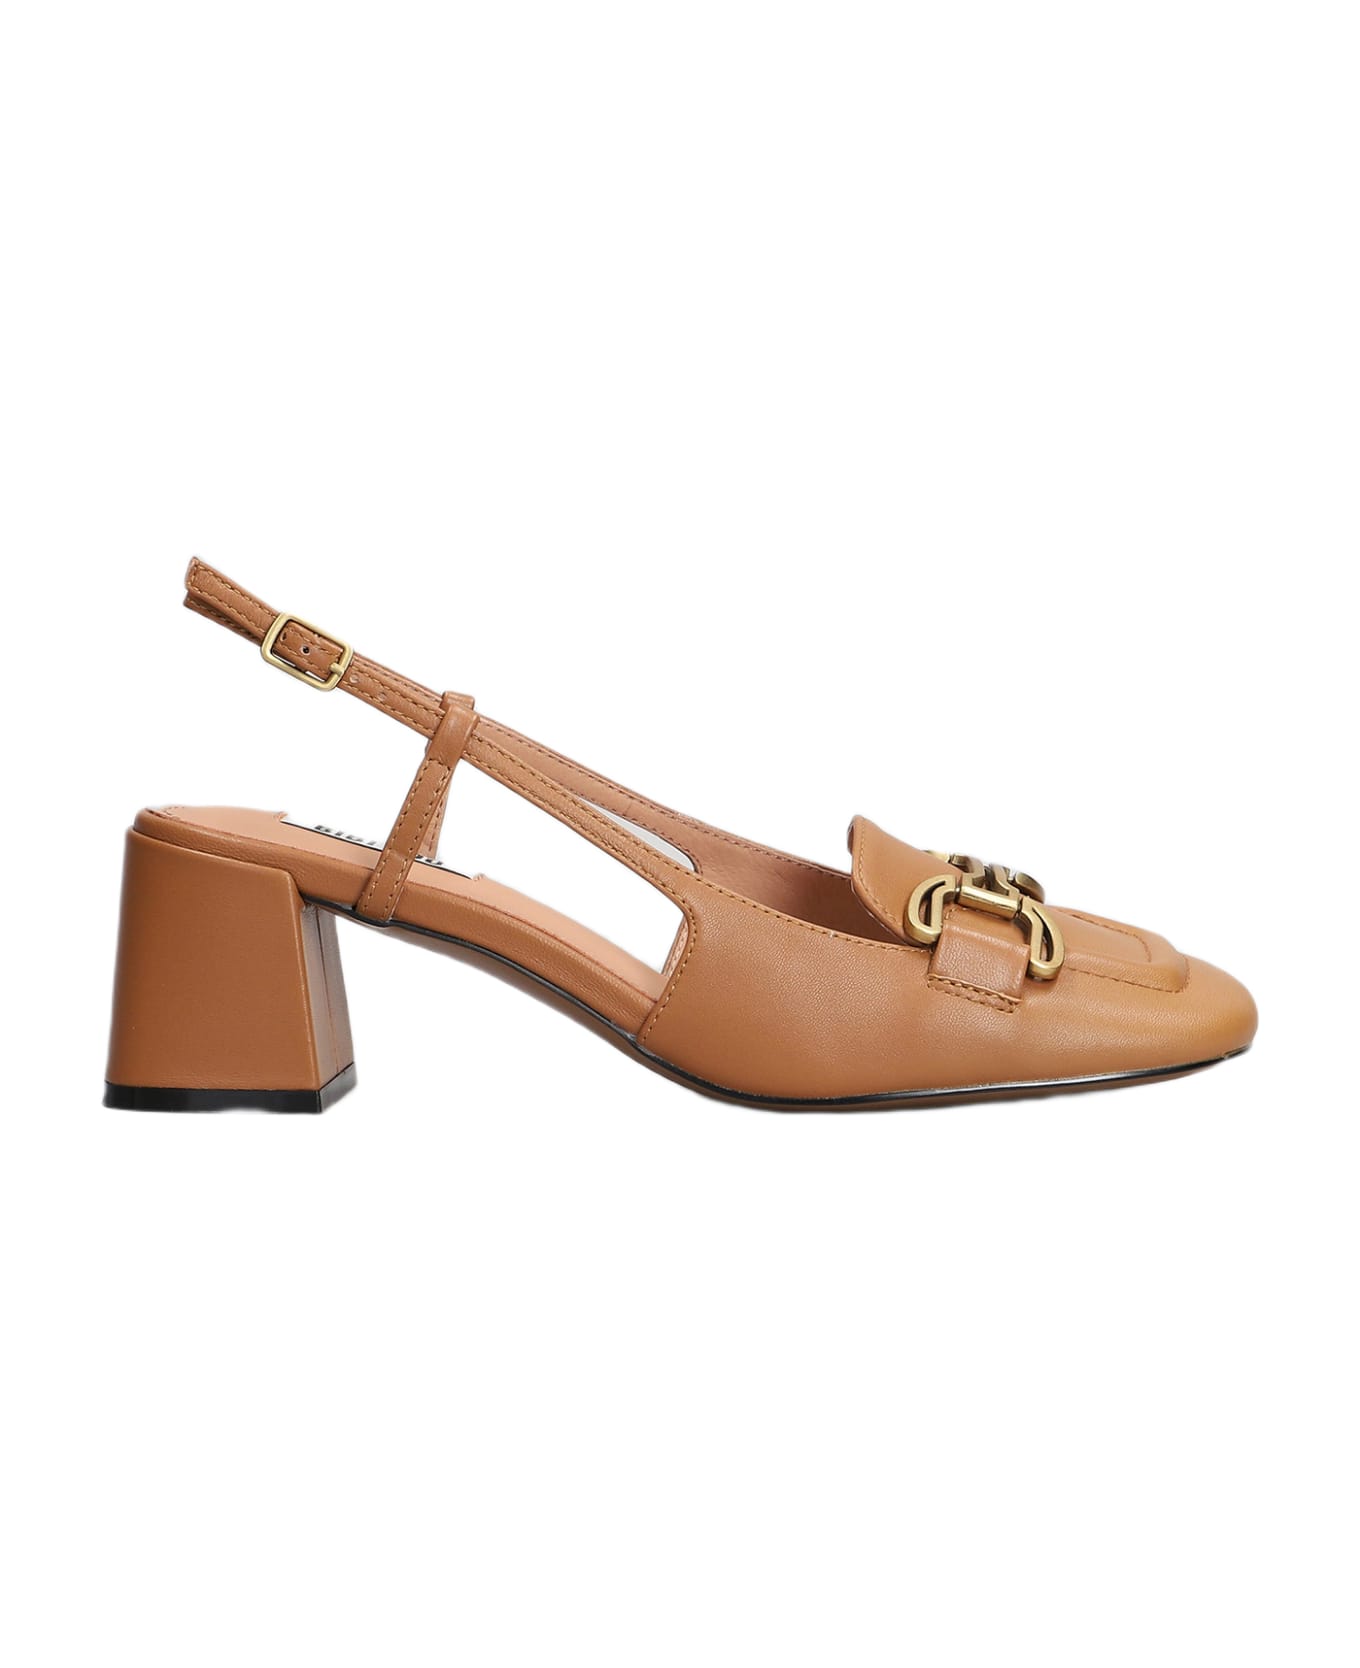 Bibi Lou Renee 60 Pumps In Leather Color Leather - leather color